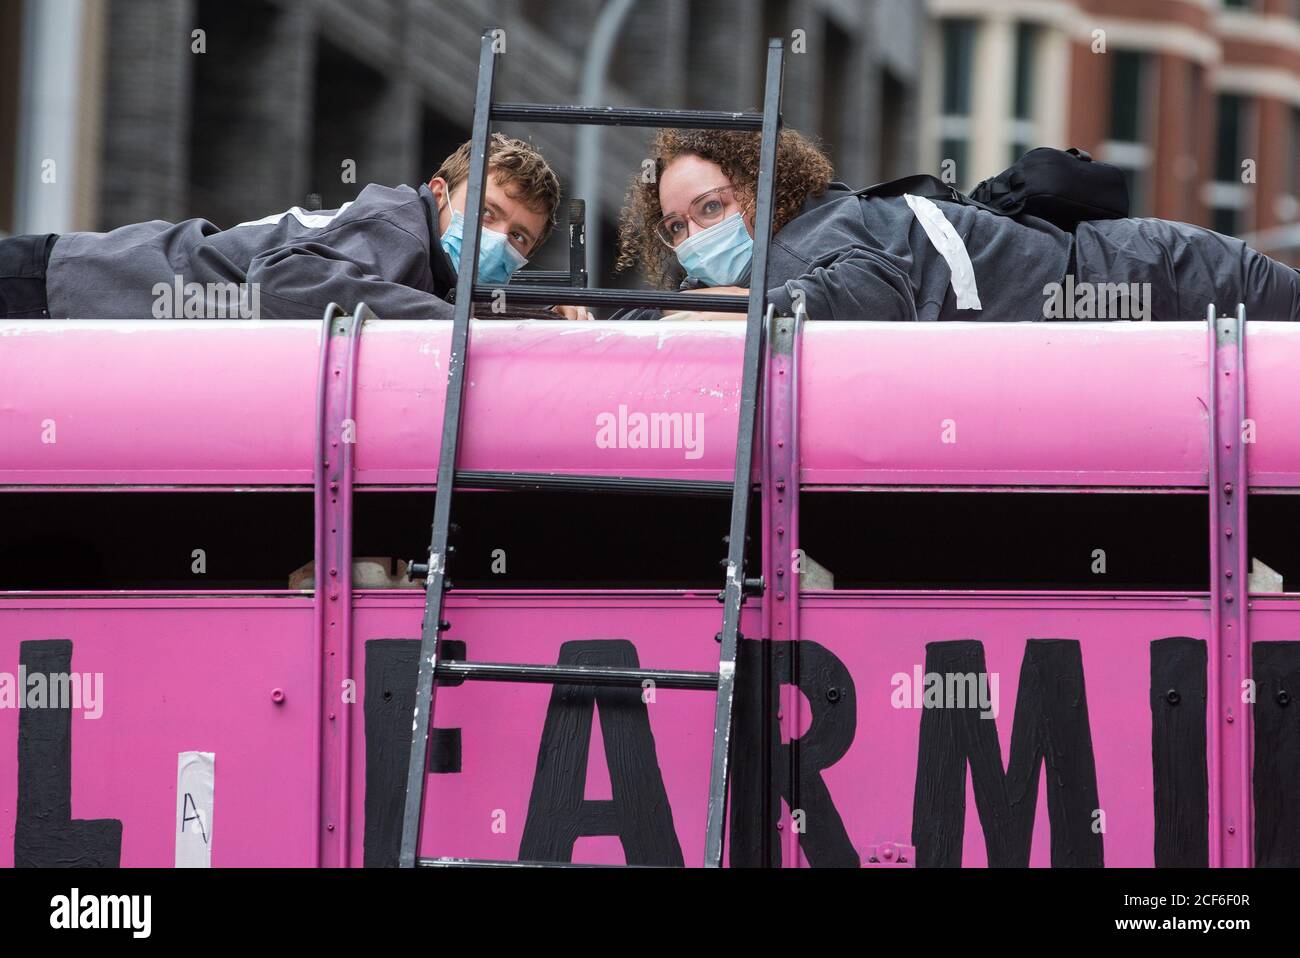 London, UK. 3rd September, 2020. Animal rights activists from Animal Rebellion are pictured glued to the top of and inside a truck in order to blockade the Department of Health and Social Care. Animal Rebellion activists are protesting in solidarity with victims of the global food system and to demand that the UK transitions to a sustainable plant-based food system. Credit: Mark Kerrison/Alamy Live News Stock Photo